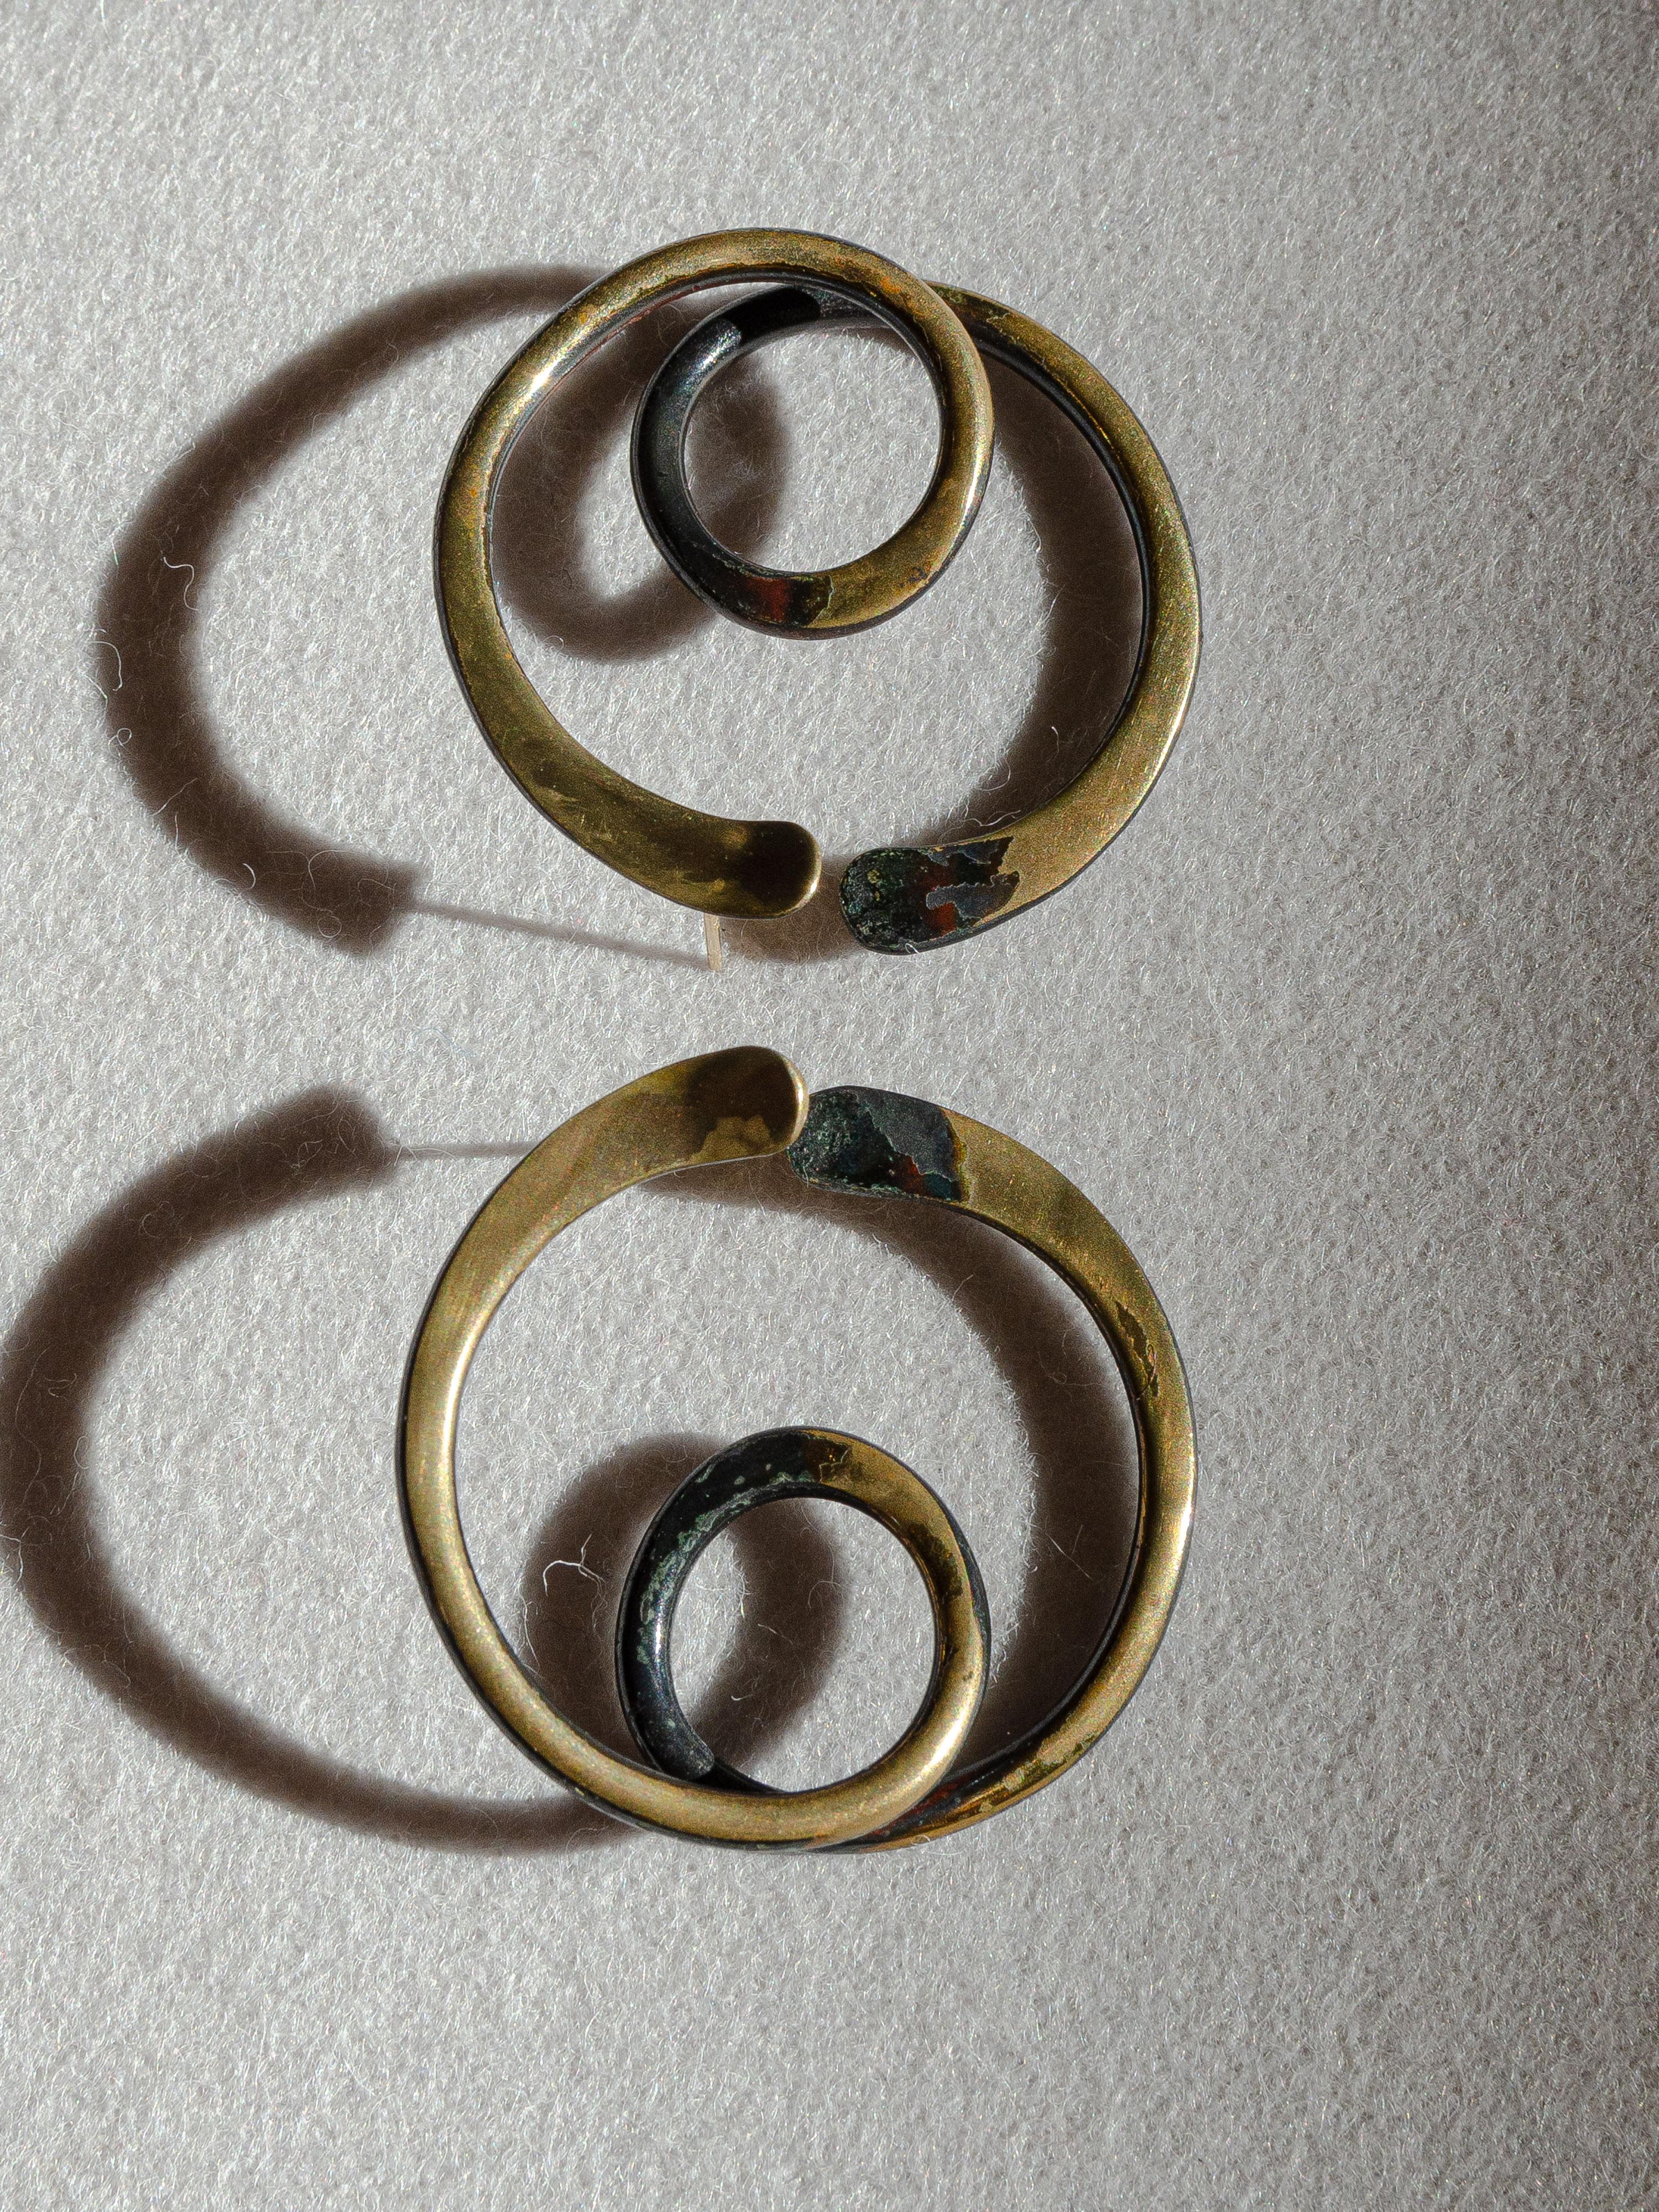 American Unusual Mid-Century Modernist Brass Coiled Earrings By Art Smith